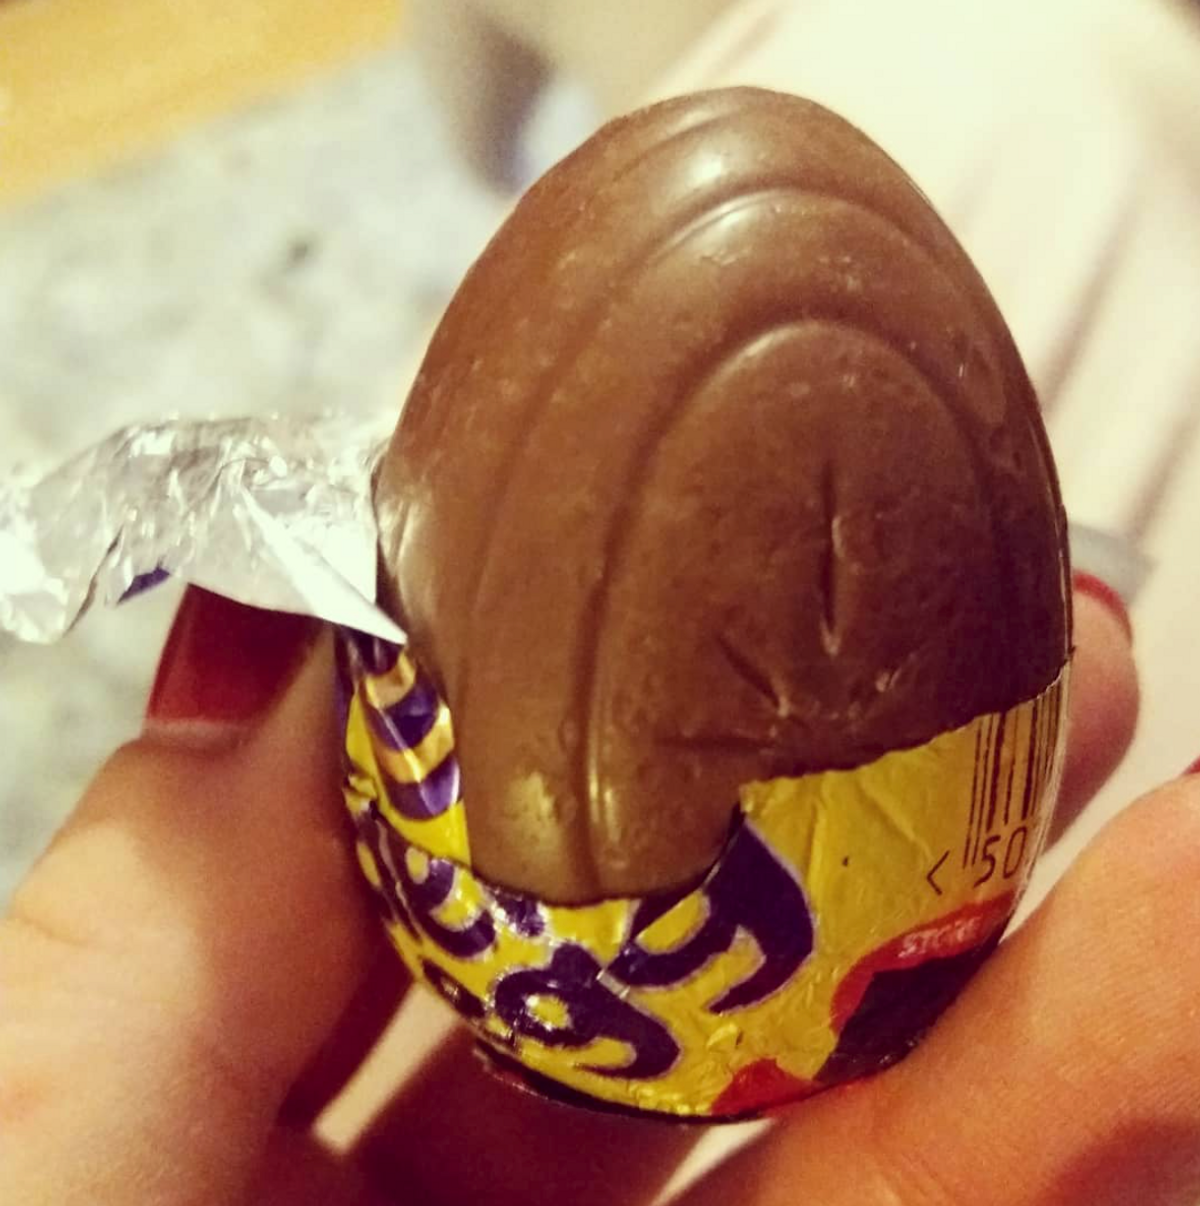 Why I Have To Eat Cadbury Eggs On Easter